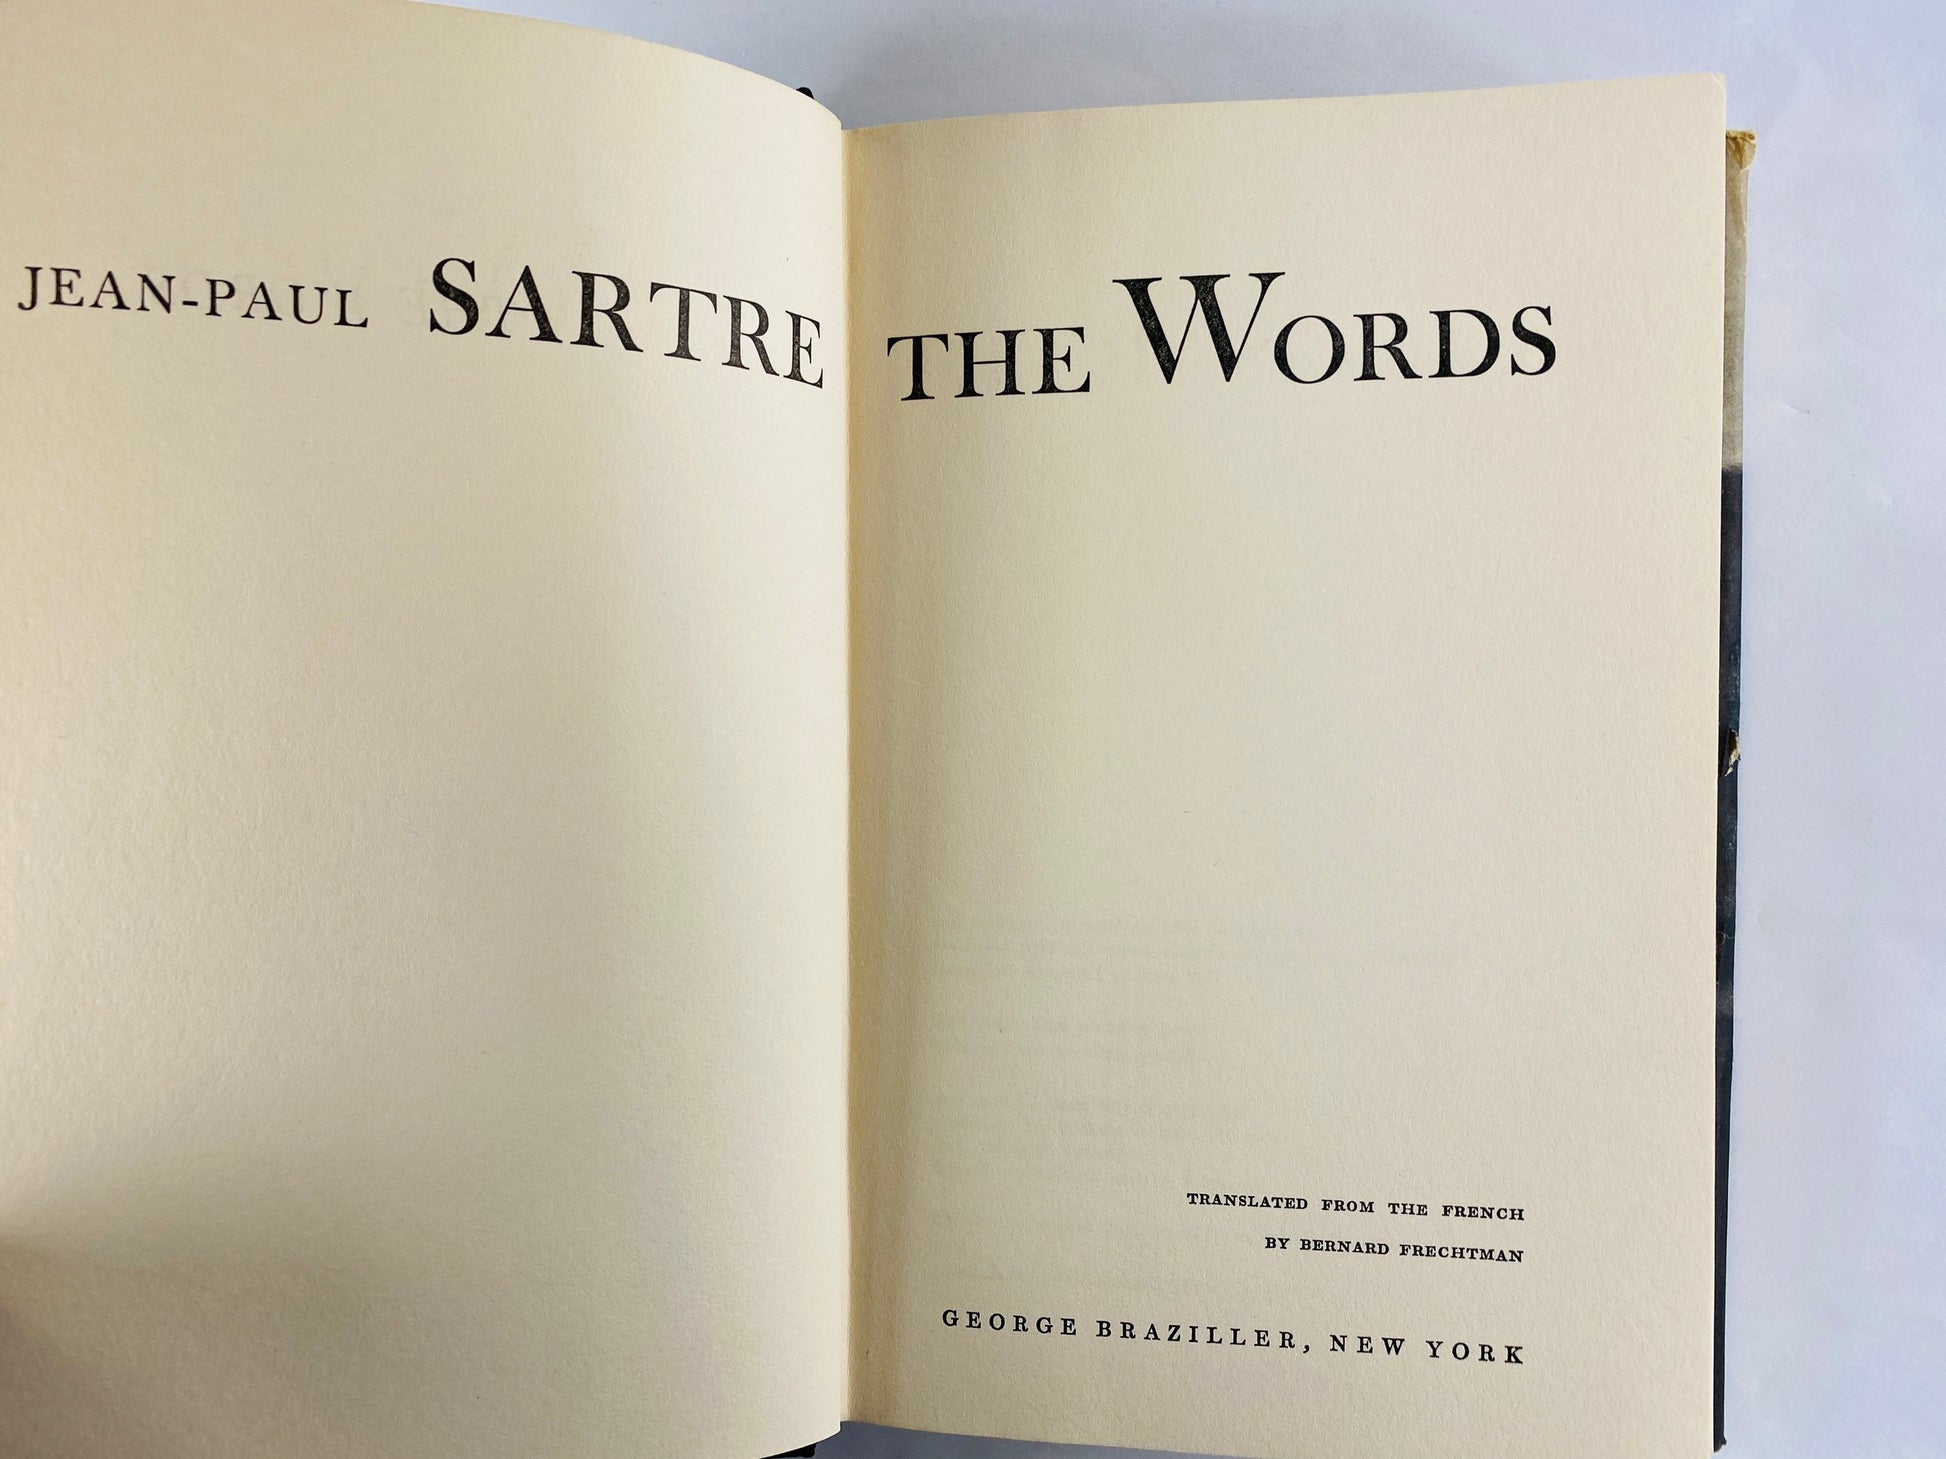 1964 The Words book by Jean-Paul Sartre Vintage Autobiography EARLY PRINTING philosophy novelist playwright. Self analysis